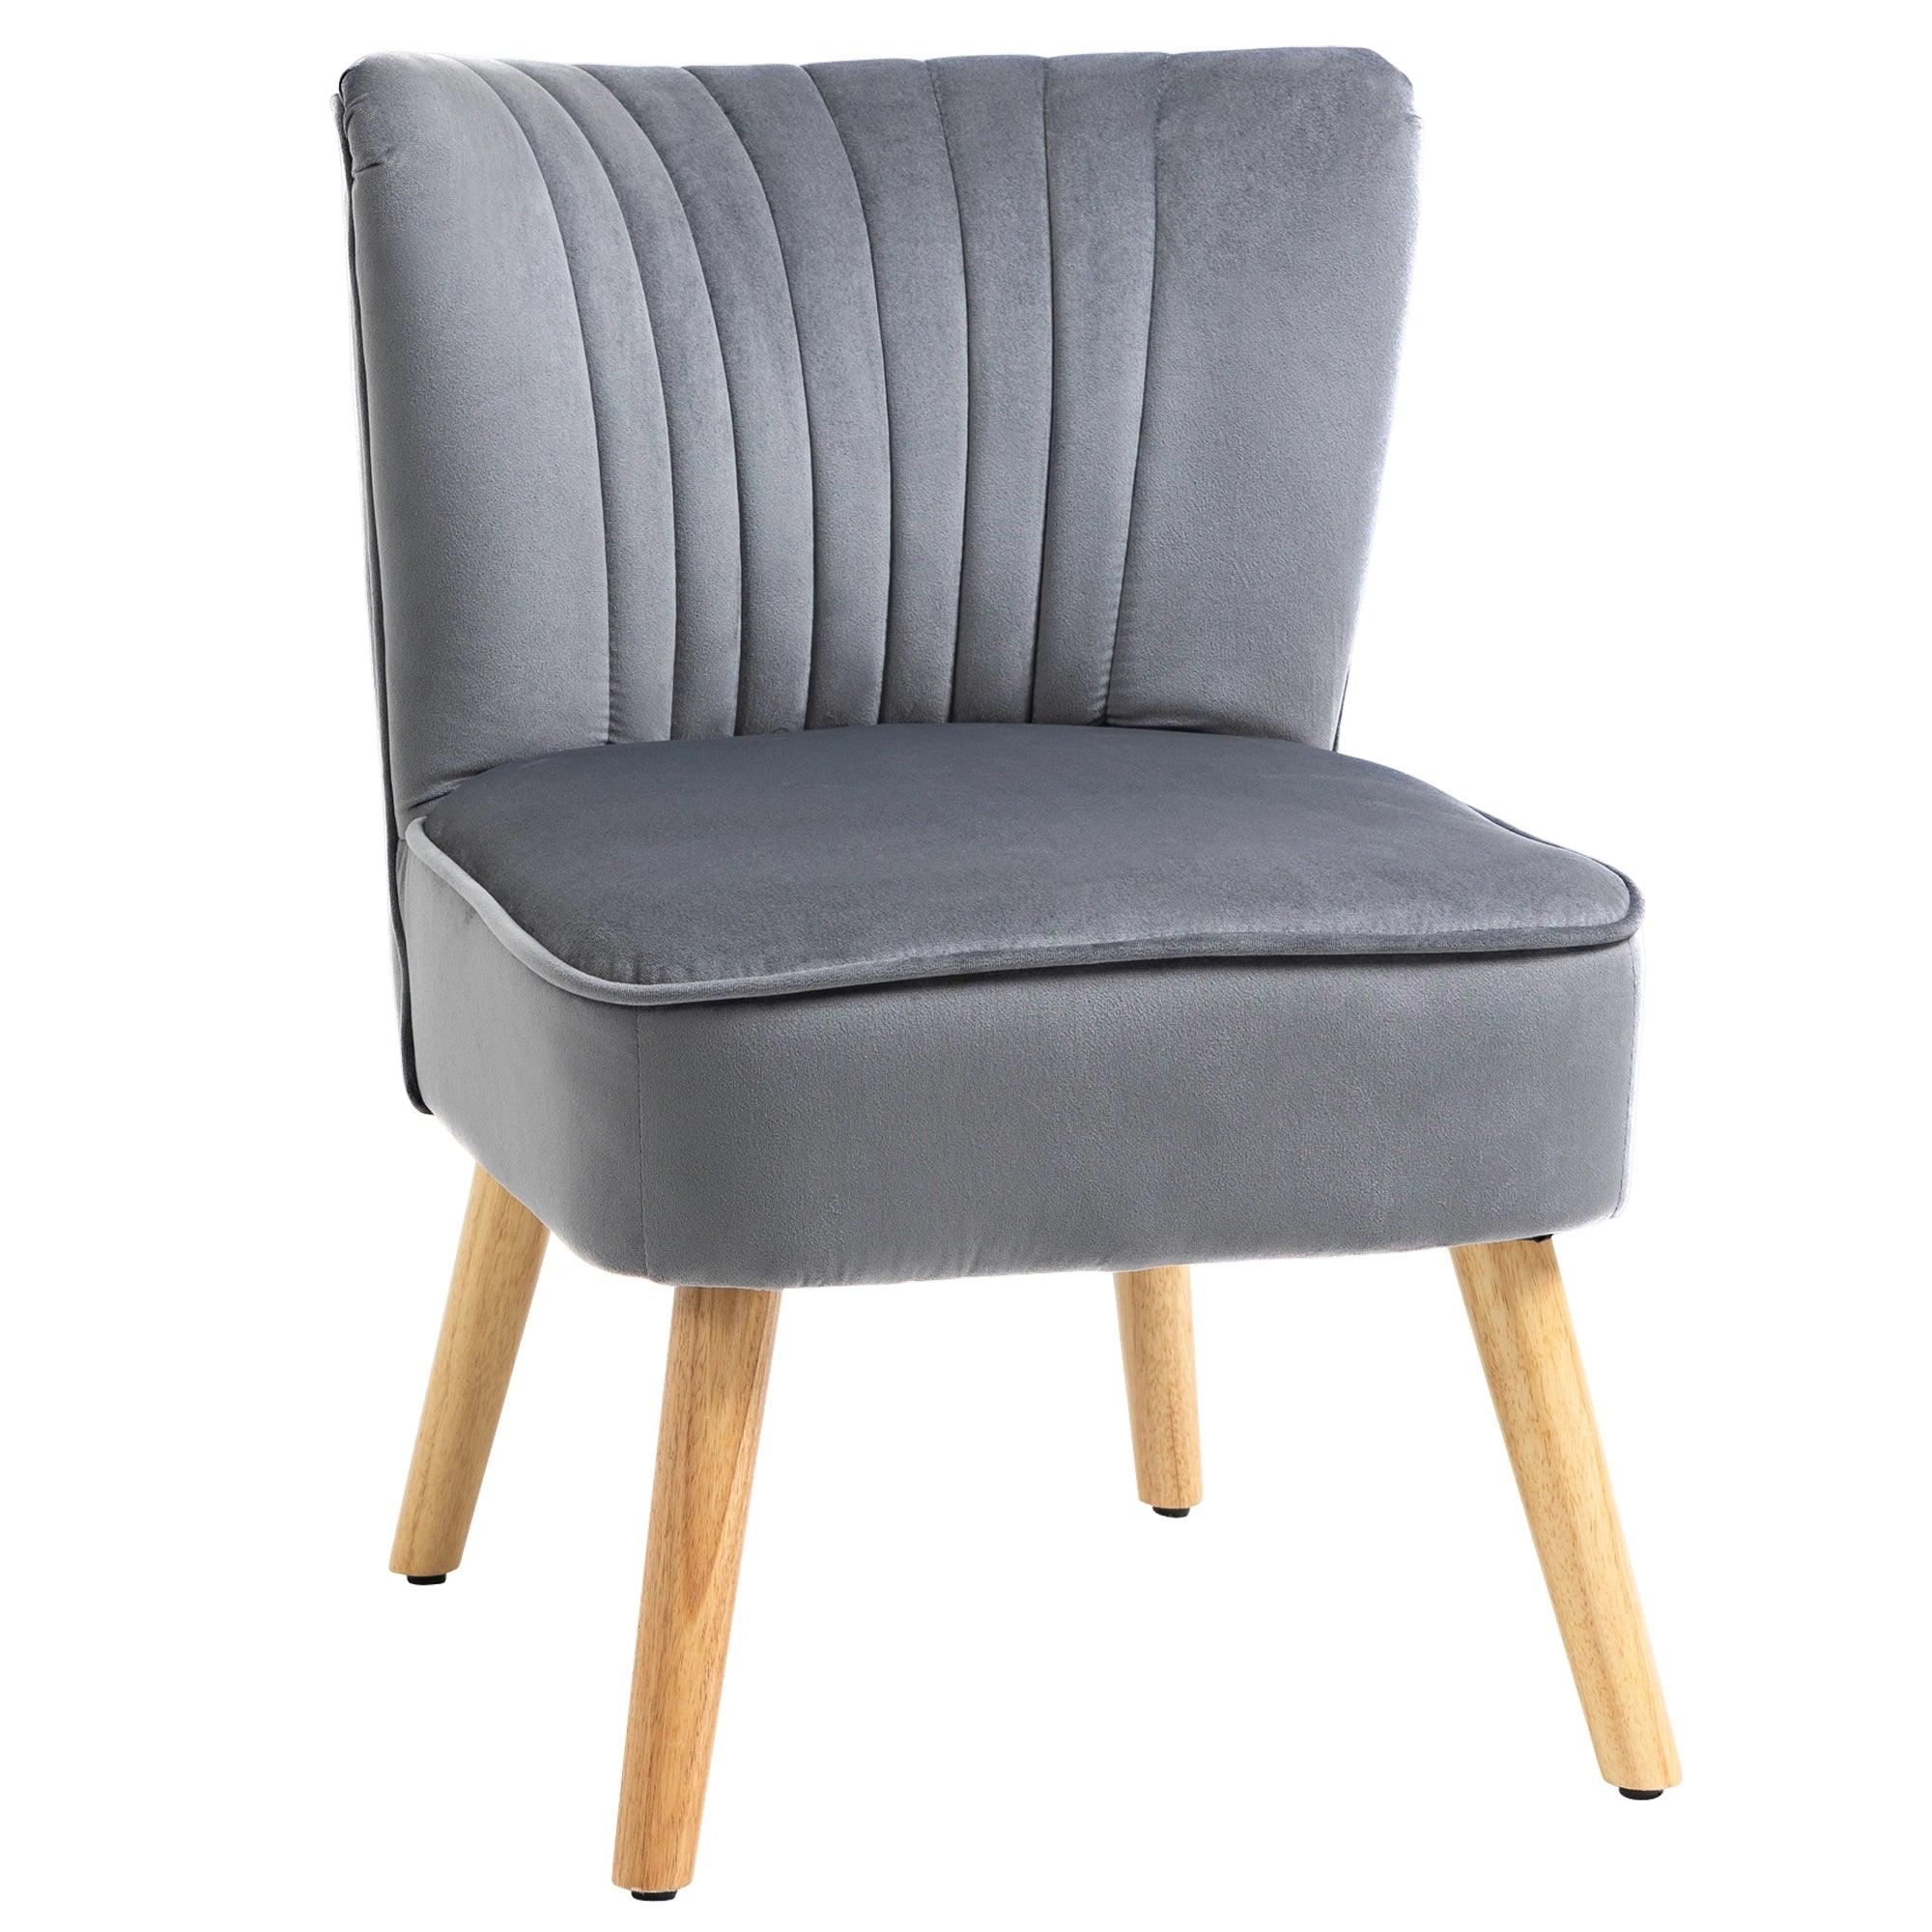 Velvet Armless Chair, Modern Accent Chair for Living Room with Wood Legs and Thick Padding, Grey